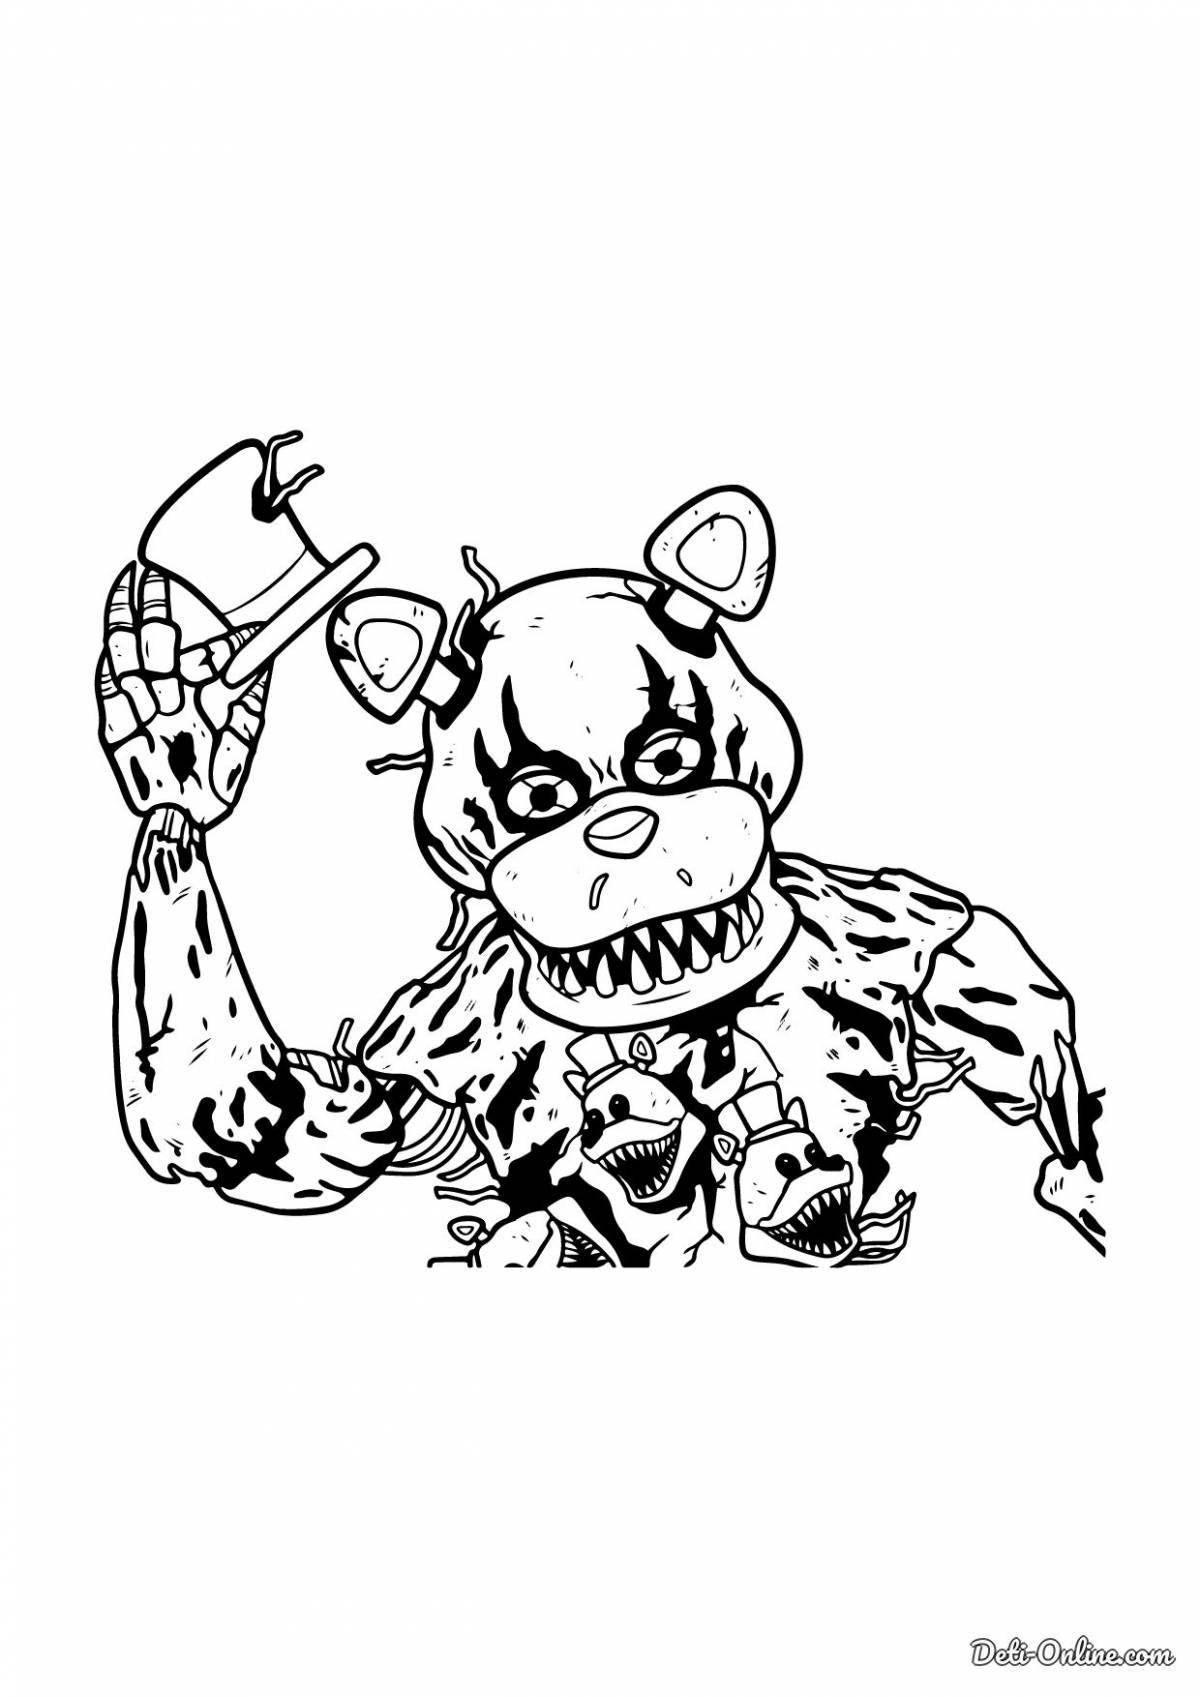 Exciting coloring nightmare fredbear